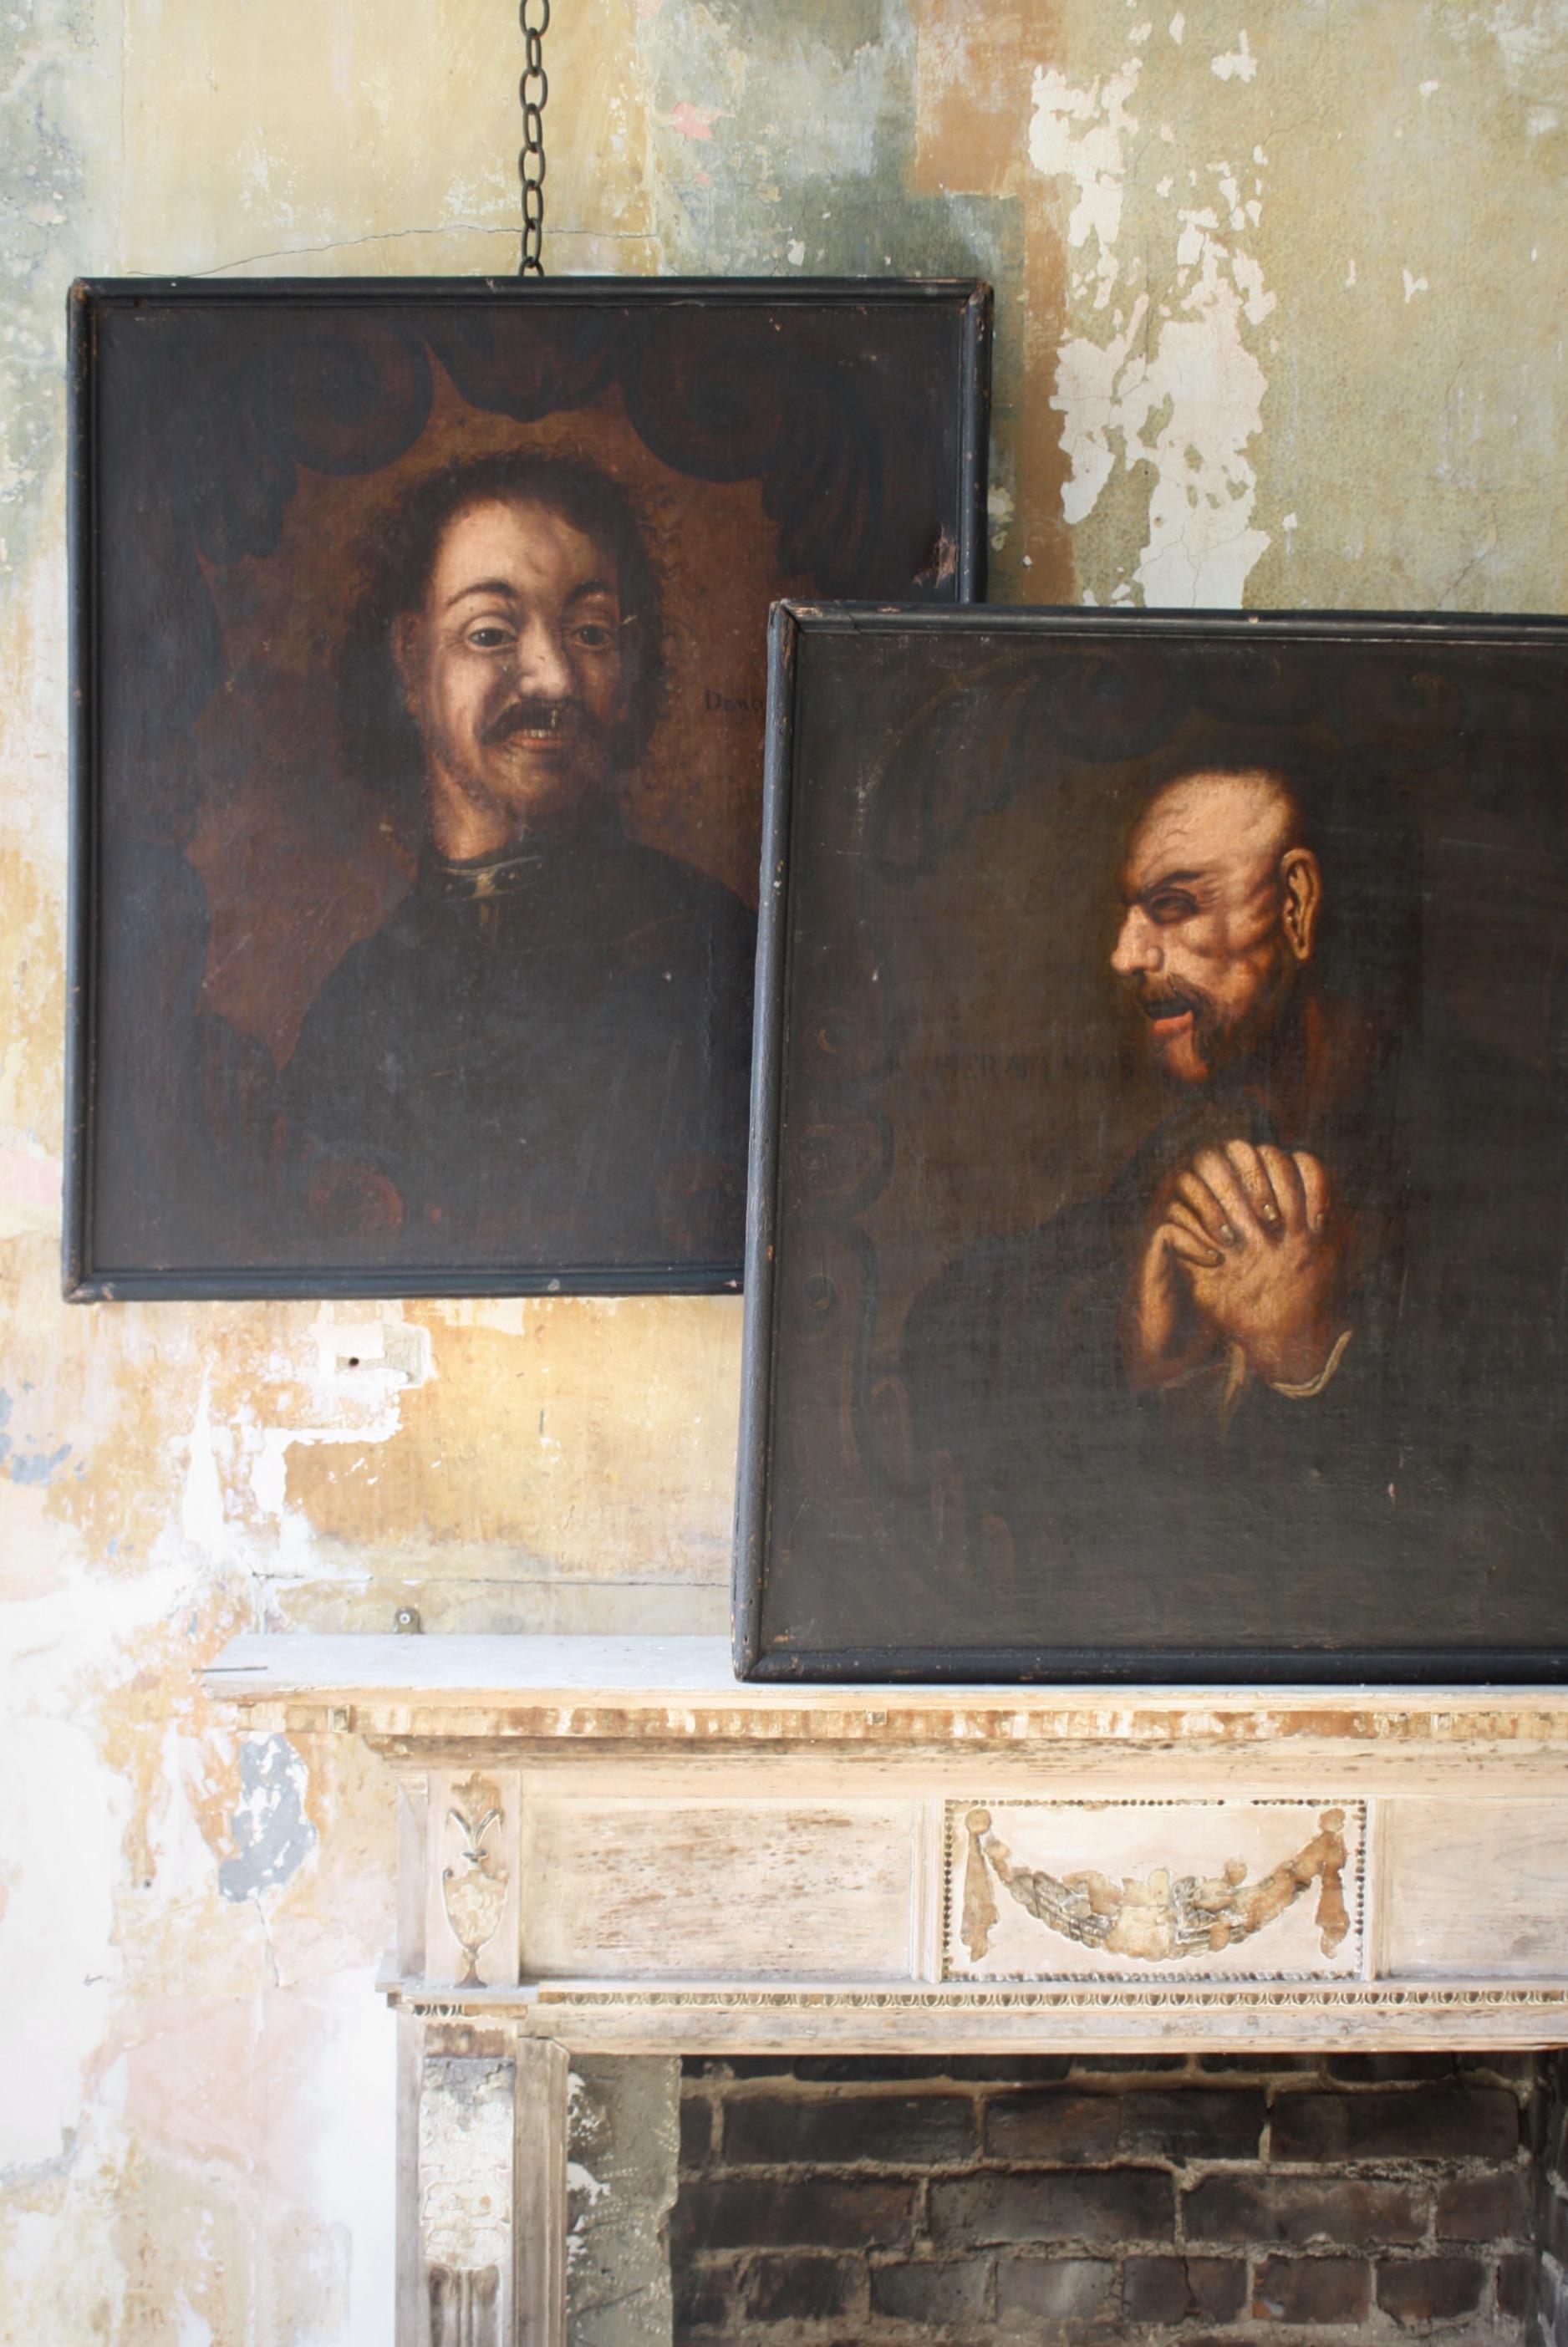 A odd pair of portraits very much in the manner of John (Tim Bobbin) Collier the Lancashire Hogarth.

The paining portray Democritus Laughing and Heraclitus Weeping, taken from the original image by Rembrandt Harmenszoon van Rijn, 1606-1669. Later